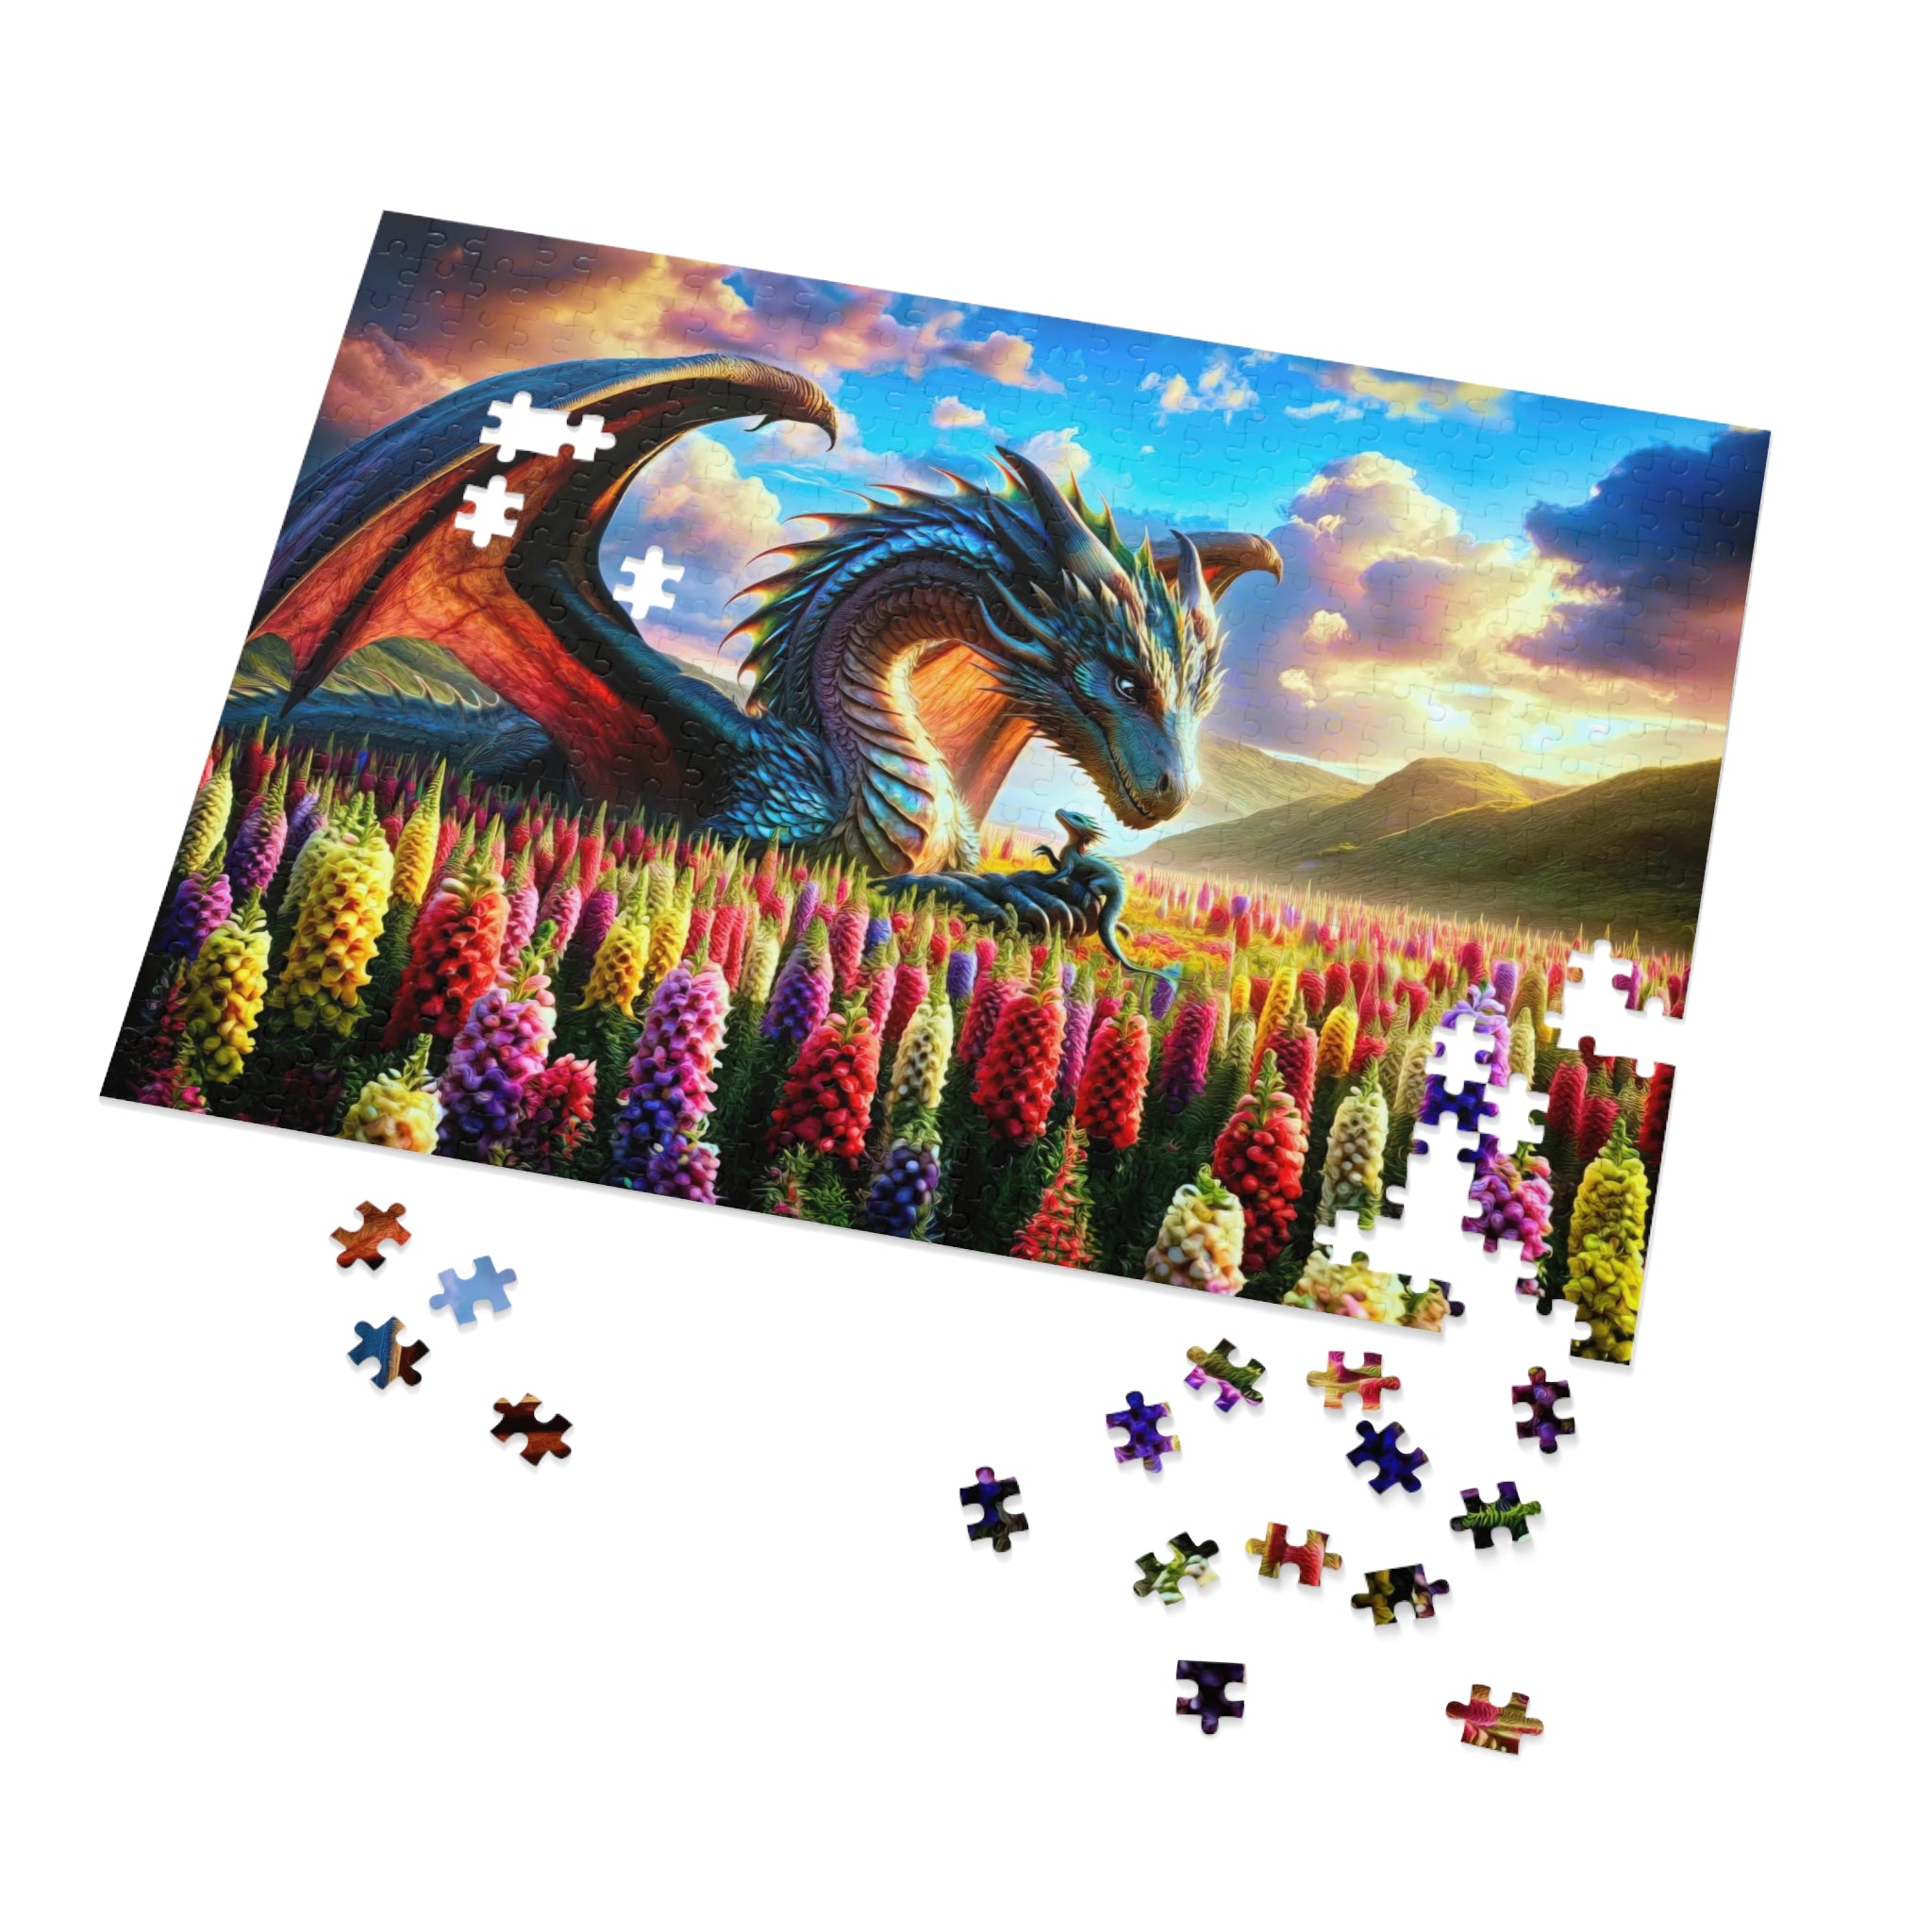 The Snapdragon Sentinel Puzzle